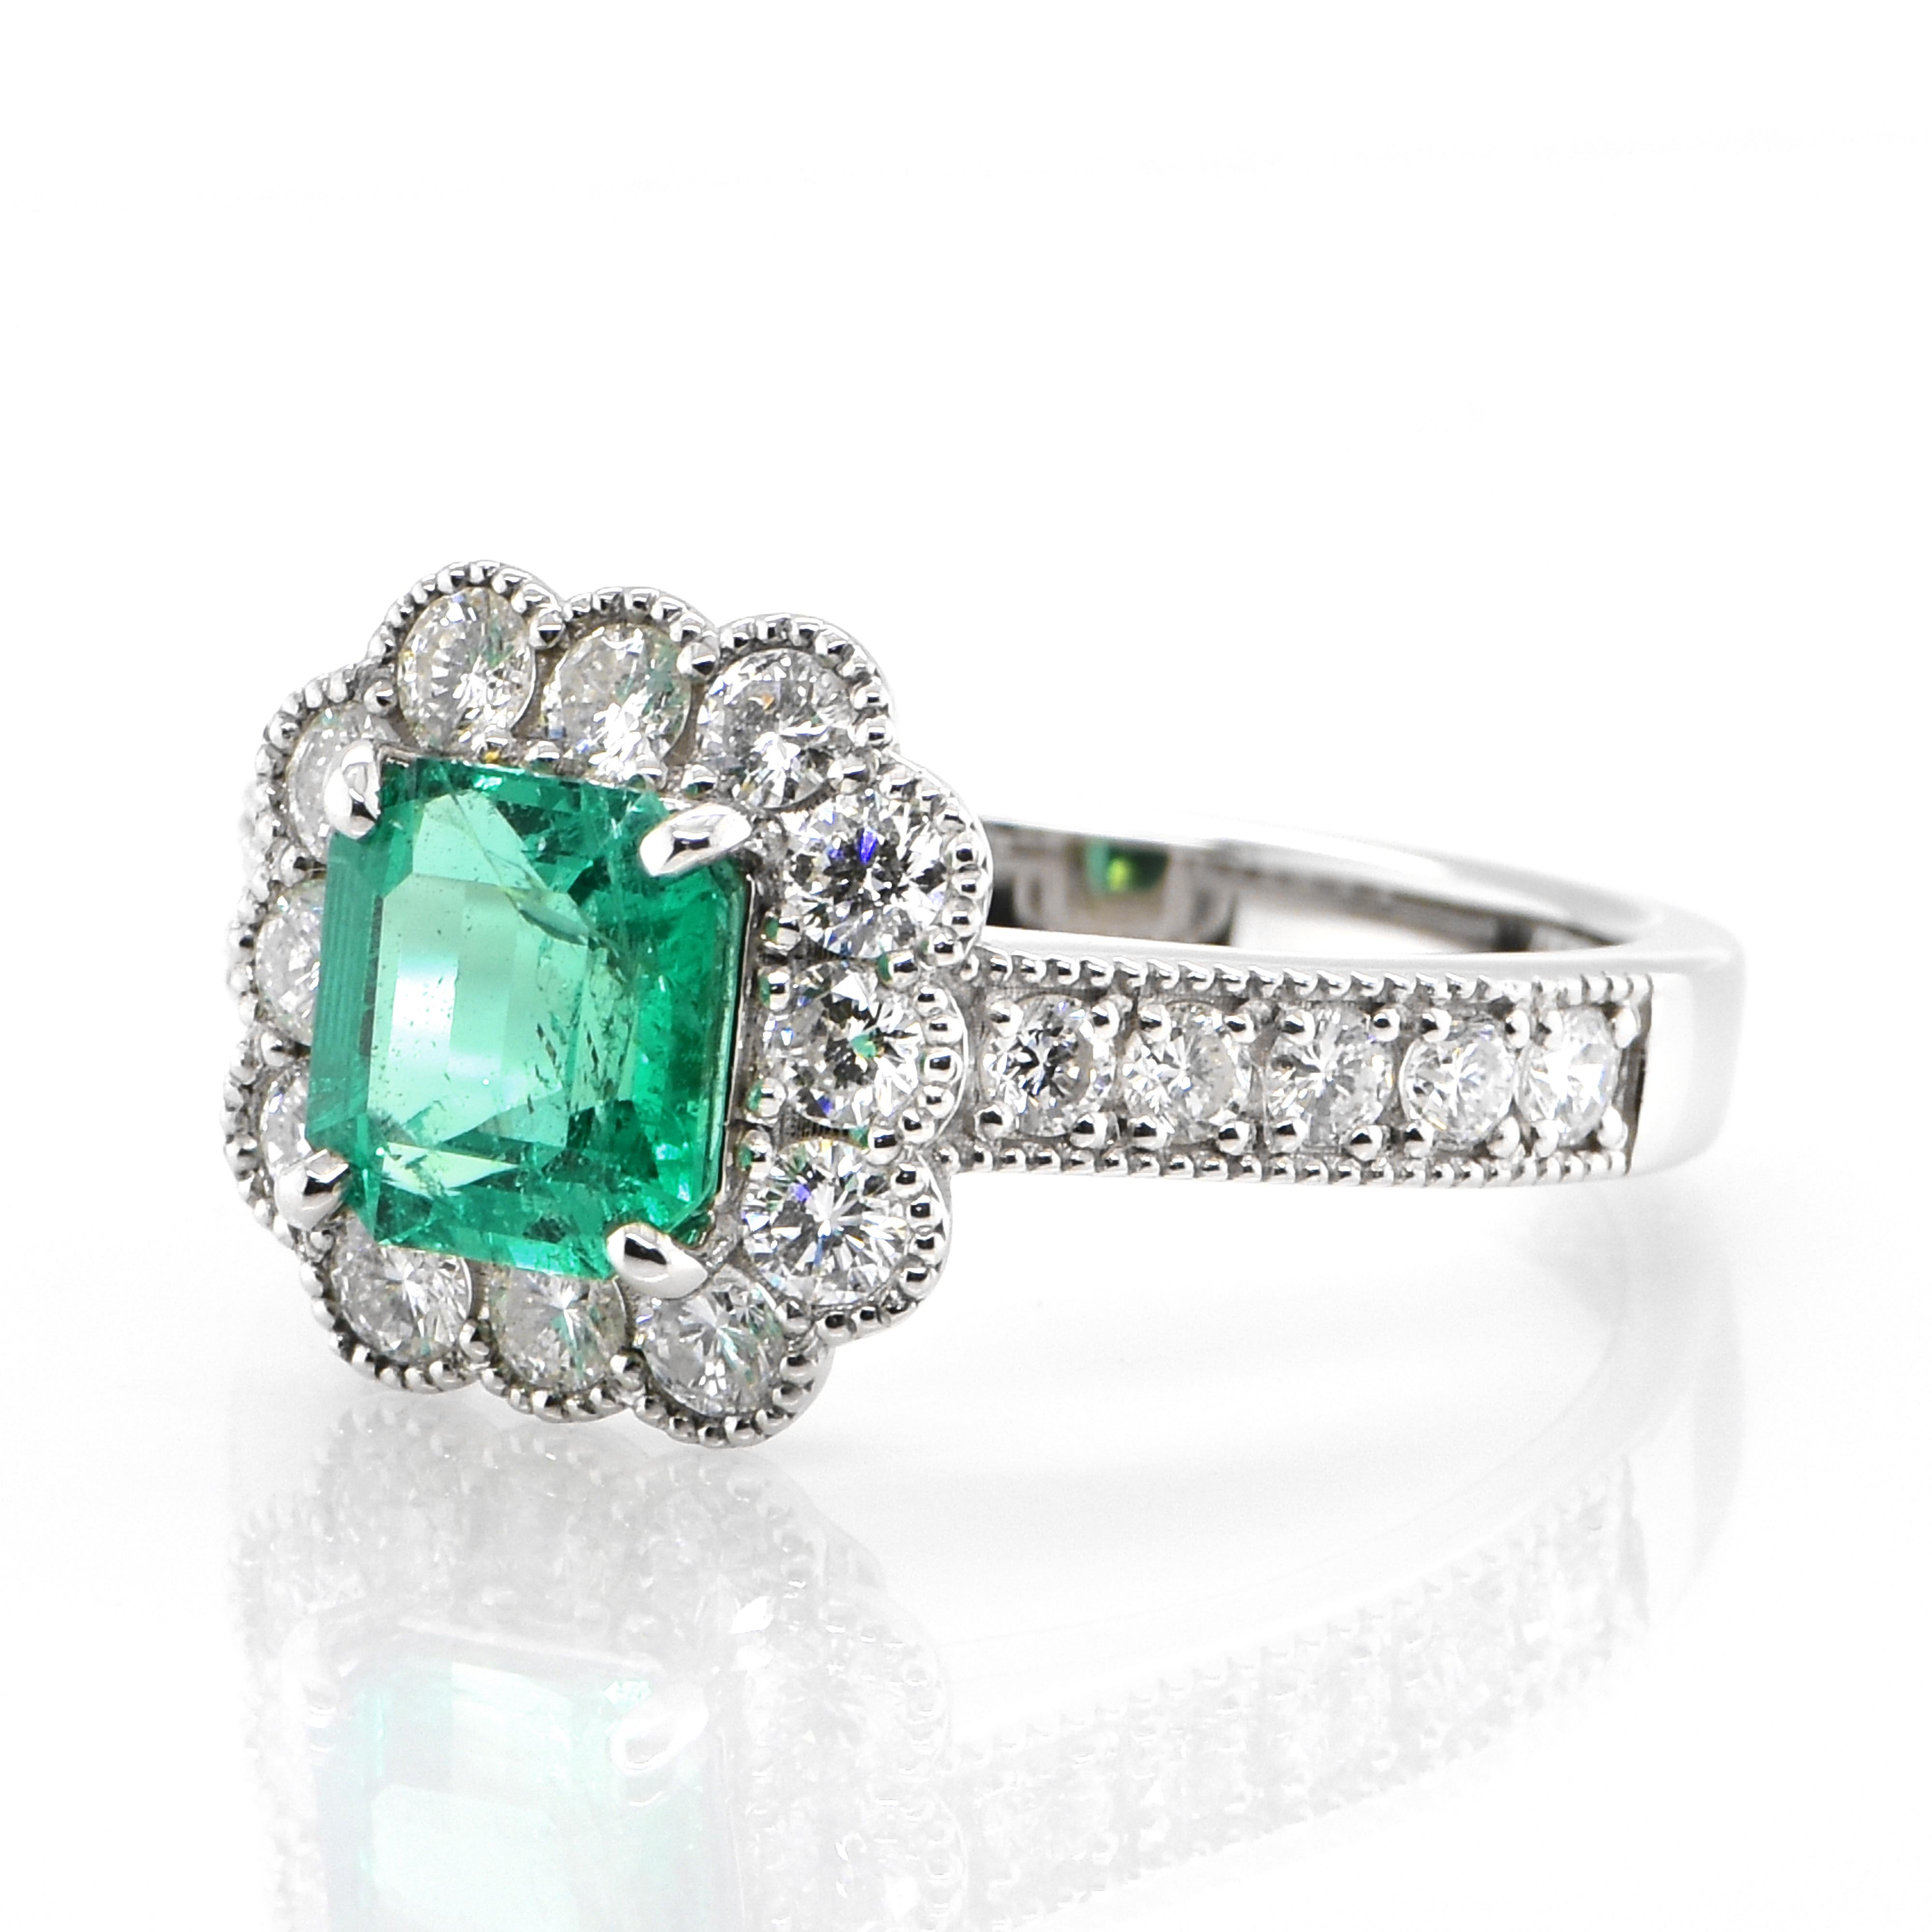 A stunning ring featuring a 1.15 Carat Natural Emerald and 0.81 Carats of Diamond Accents set in Platinum. People have admired emerald’s green for thousands of years. Emeralds have always been associated with the lushest landscapes and the richest